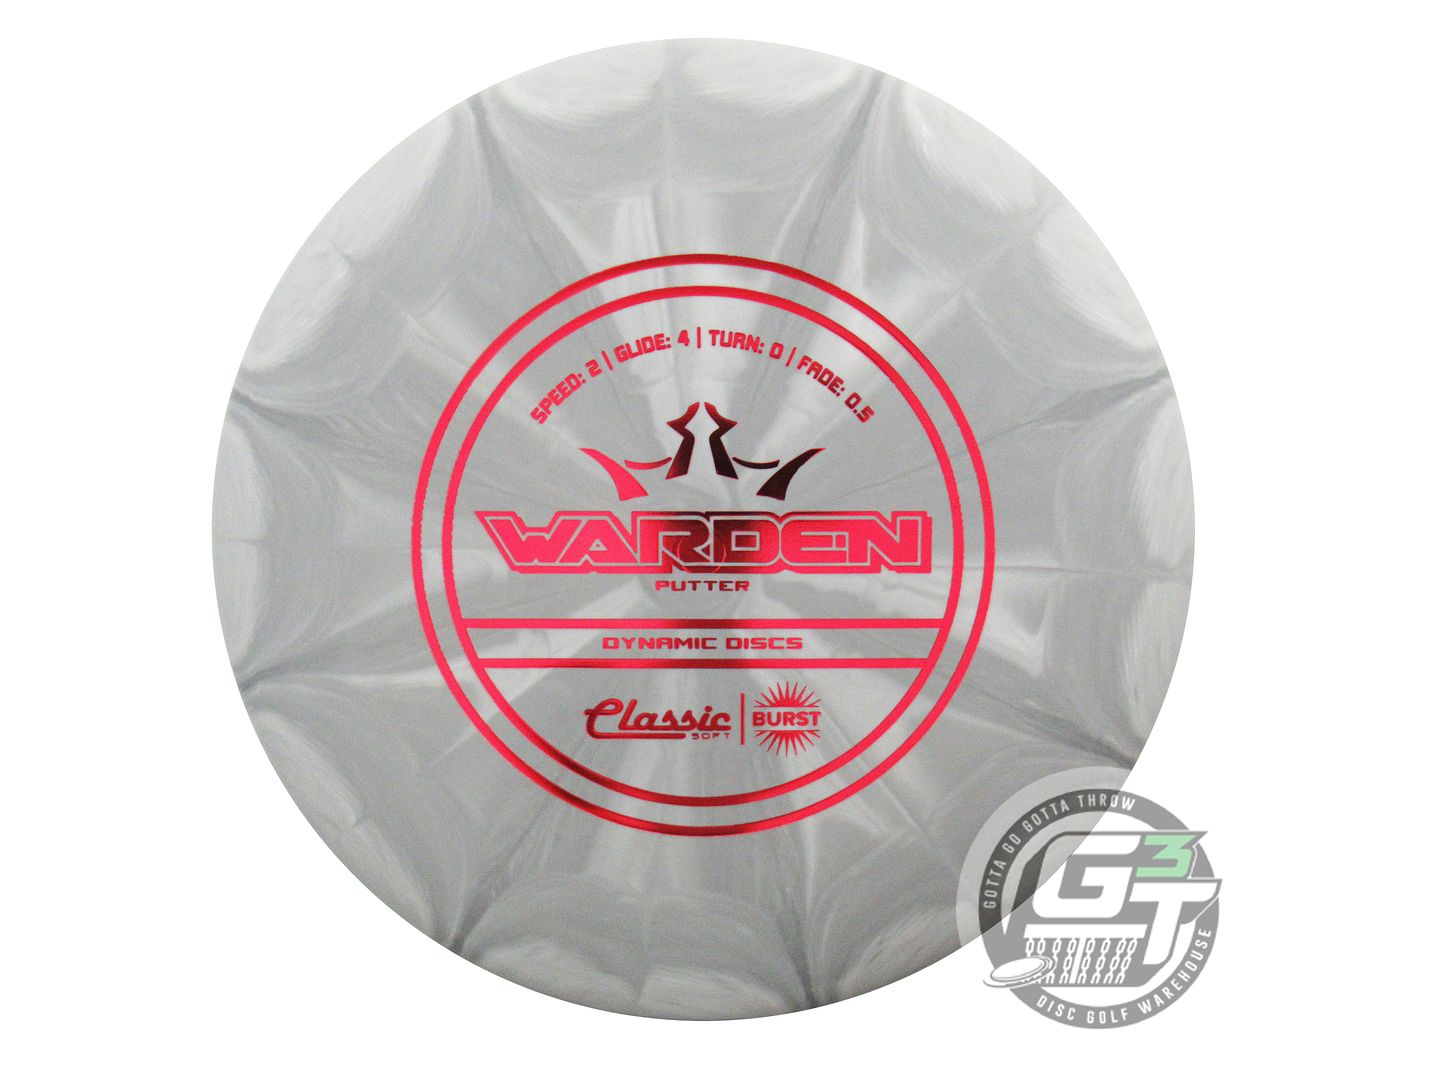 Dynamic Discs Classic Soft Burst Warden Putter Golf Disc (Individually Listed)